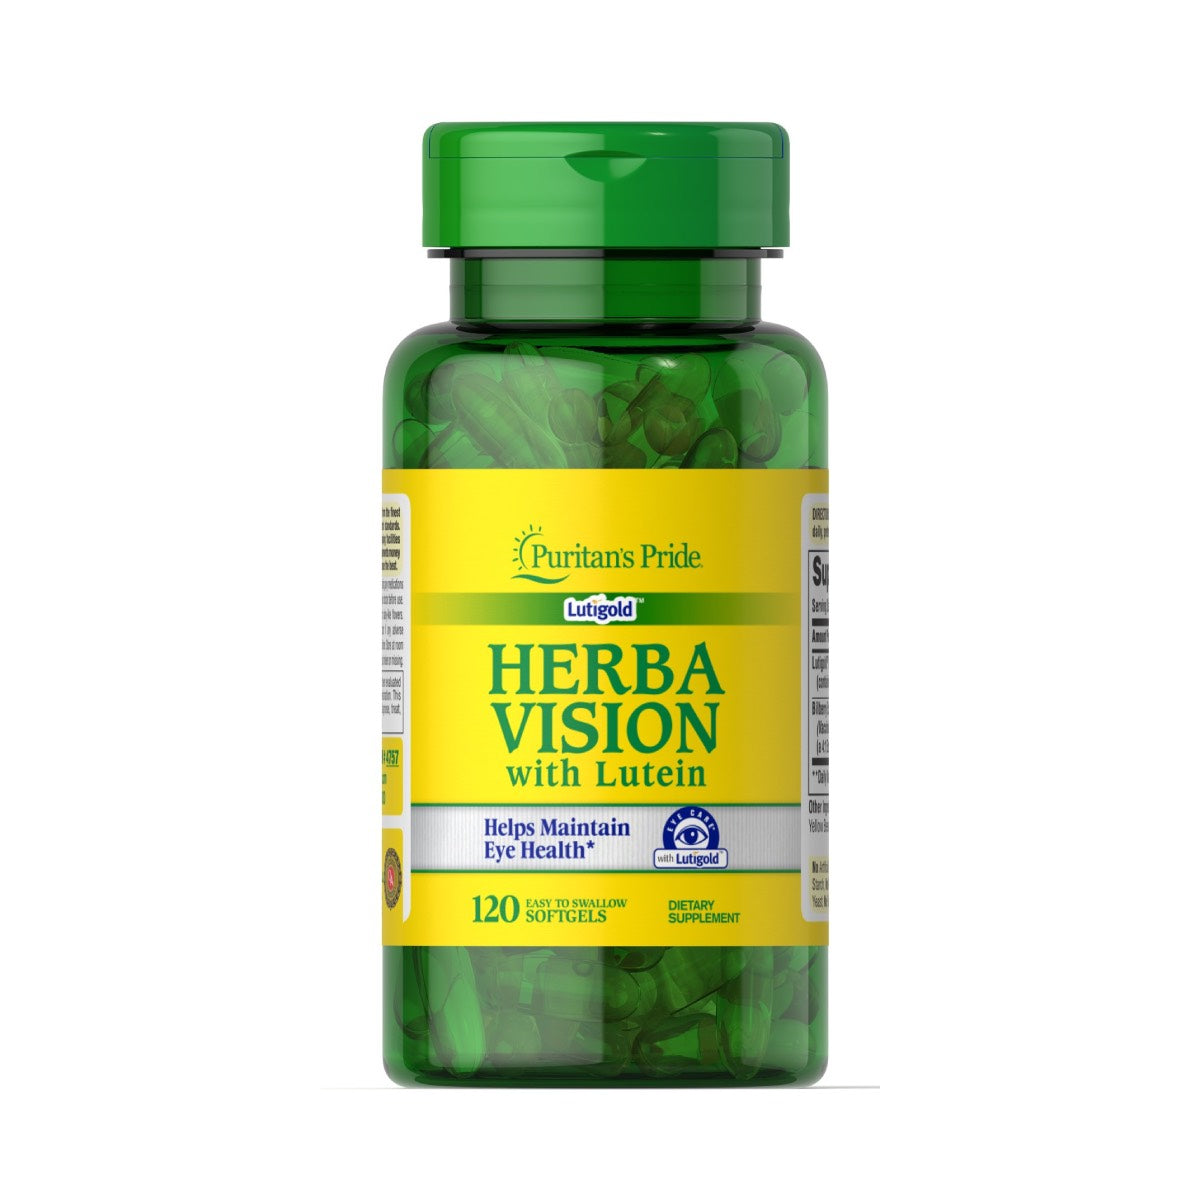 Puritan's Pride, Herbavision with Lutein and Bilberry